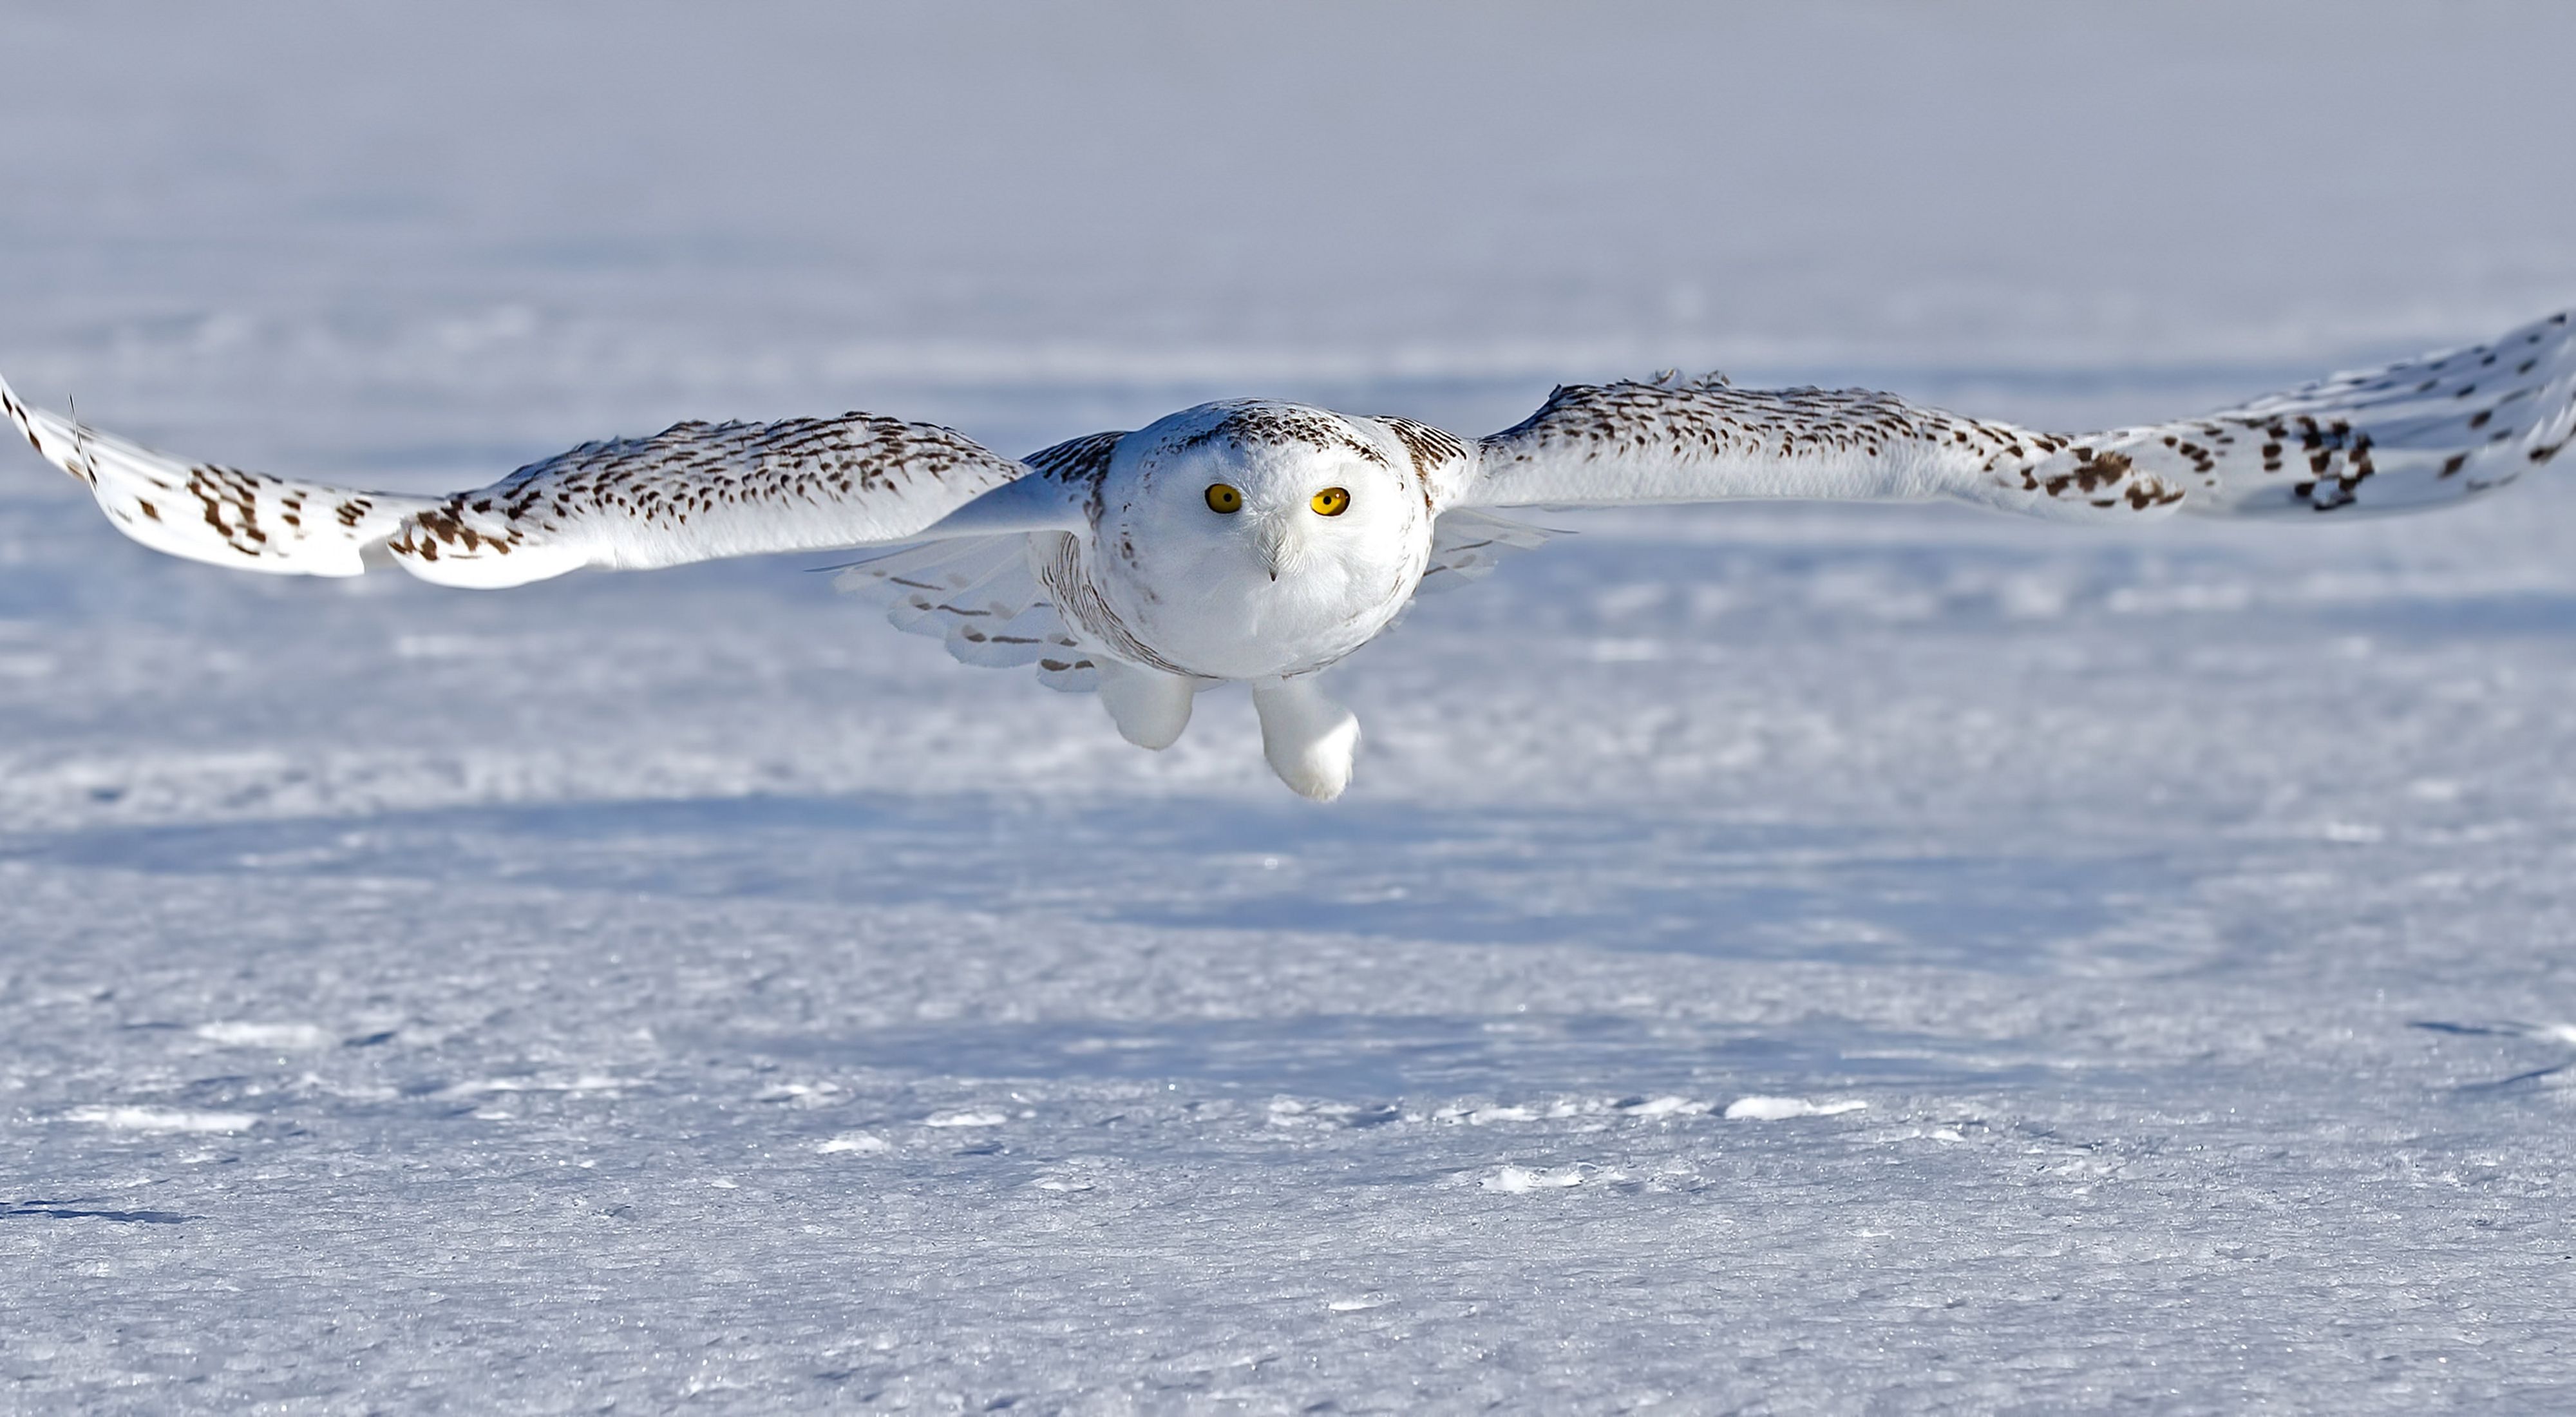 A white snowy owl with some brown stripes on the feathers flying low over a snow-covered landscape.